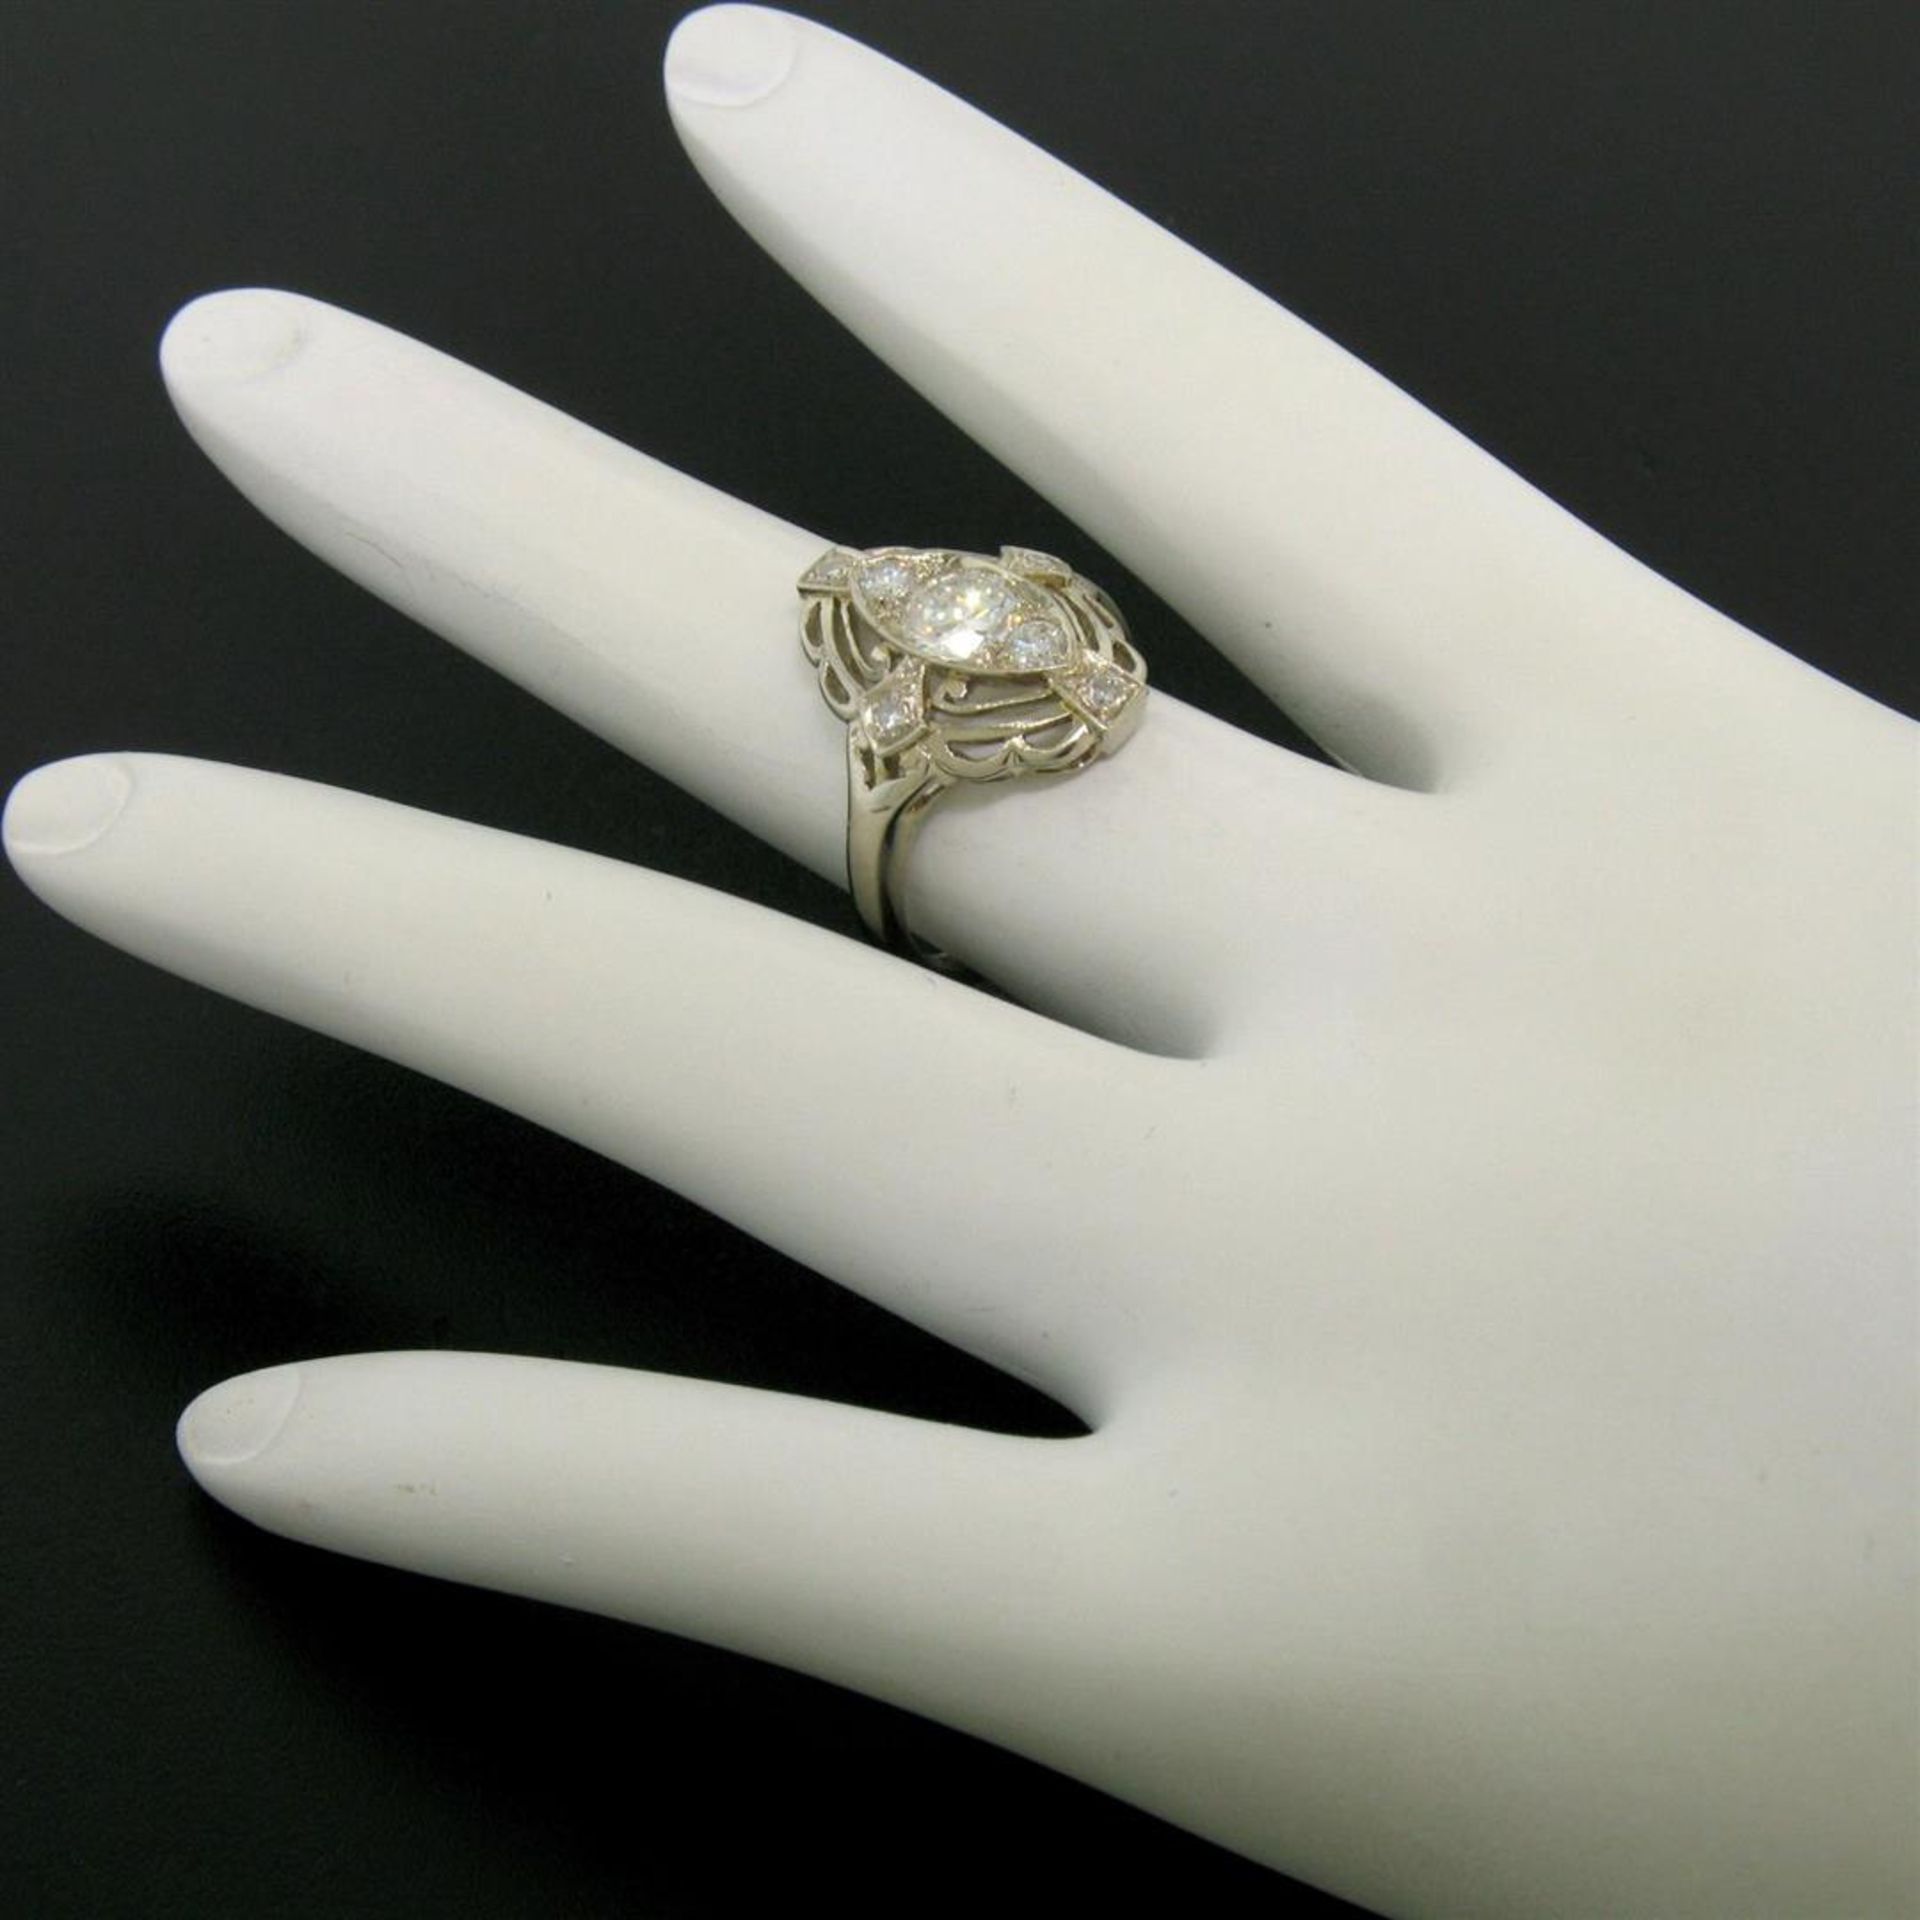 Art Deco 14k White Gold 0.85 ctw Diamond Large Open Work Cocktail Ring - Image 5 of 9